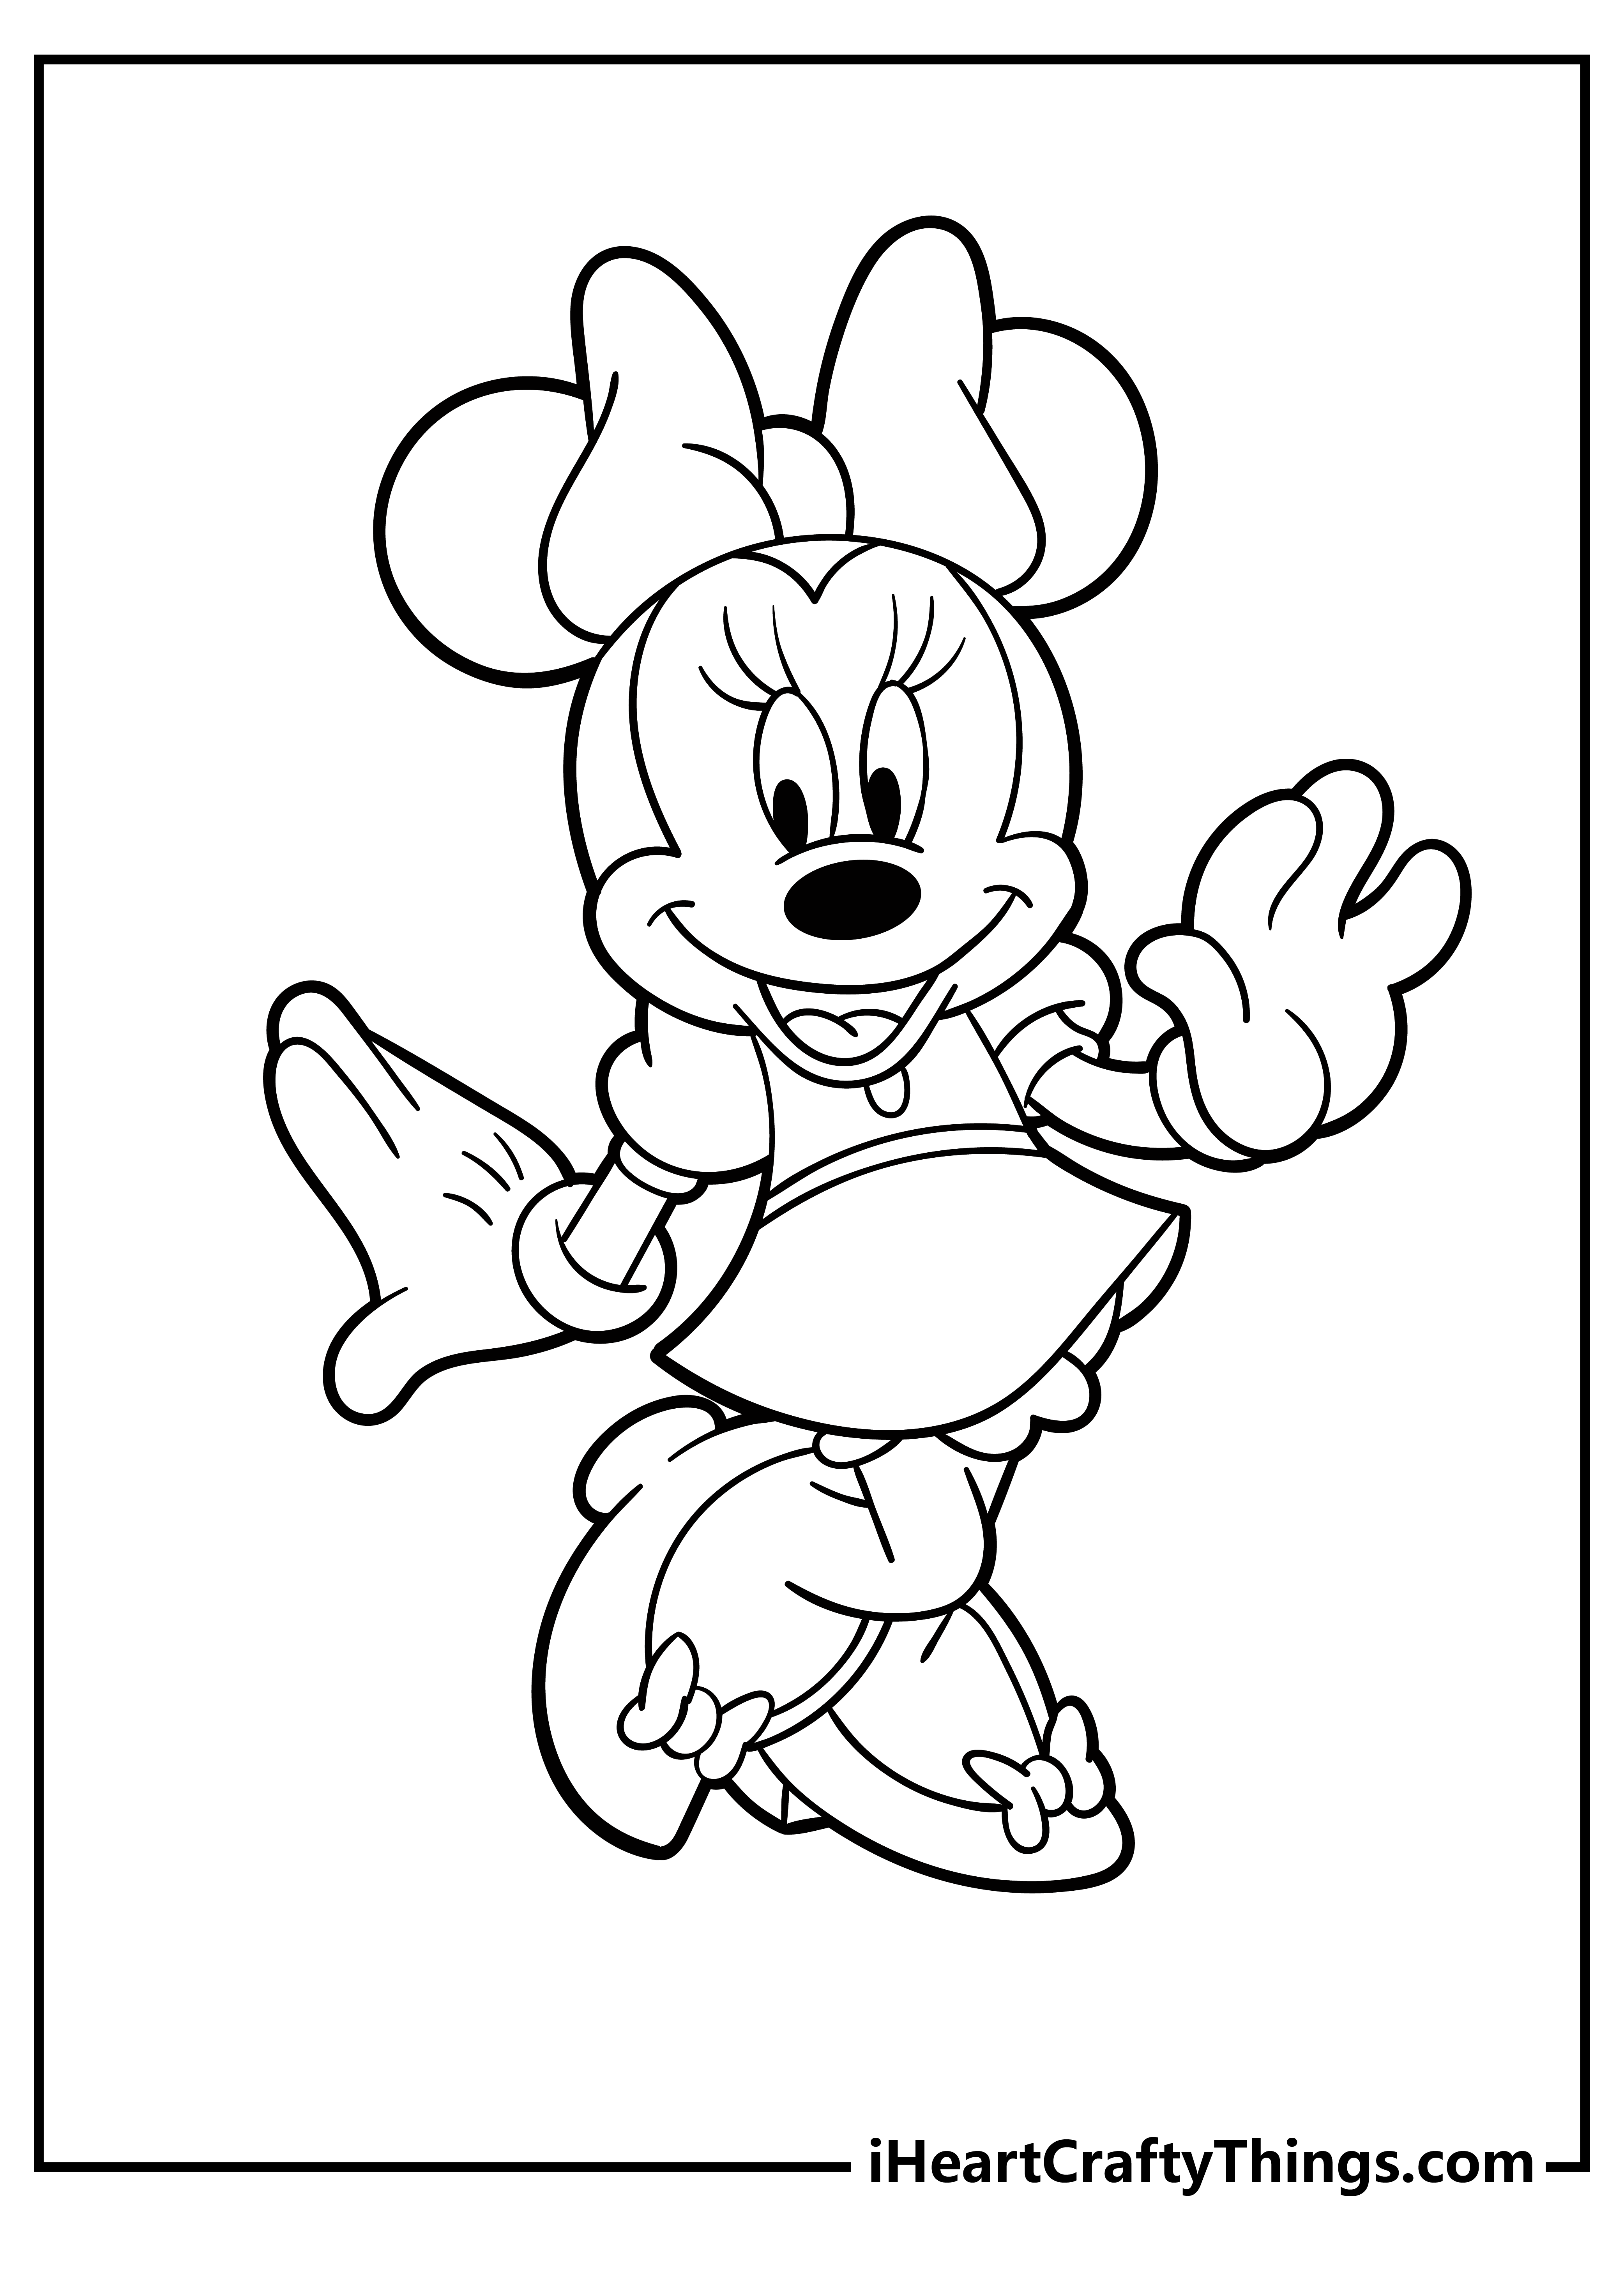 Minnie Mouse Coloring Sheet for children free download